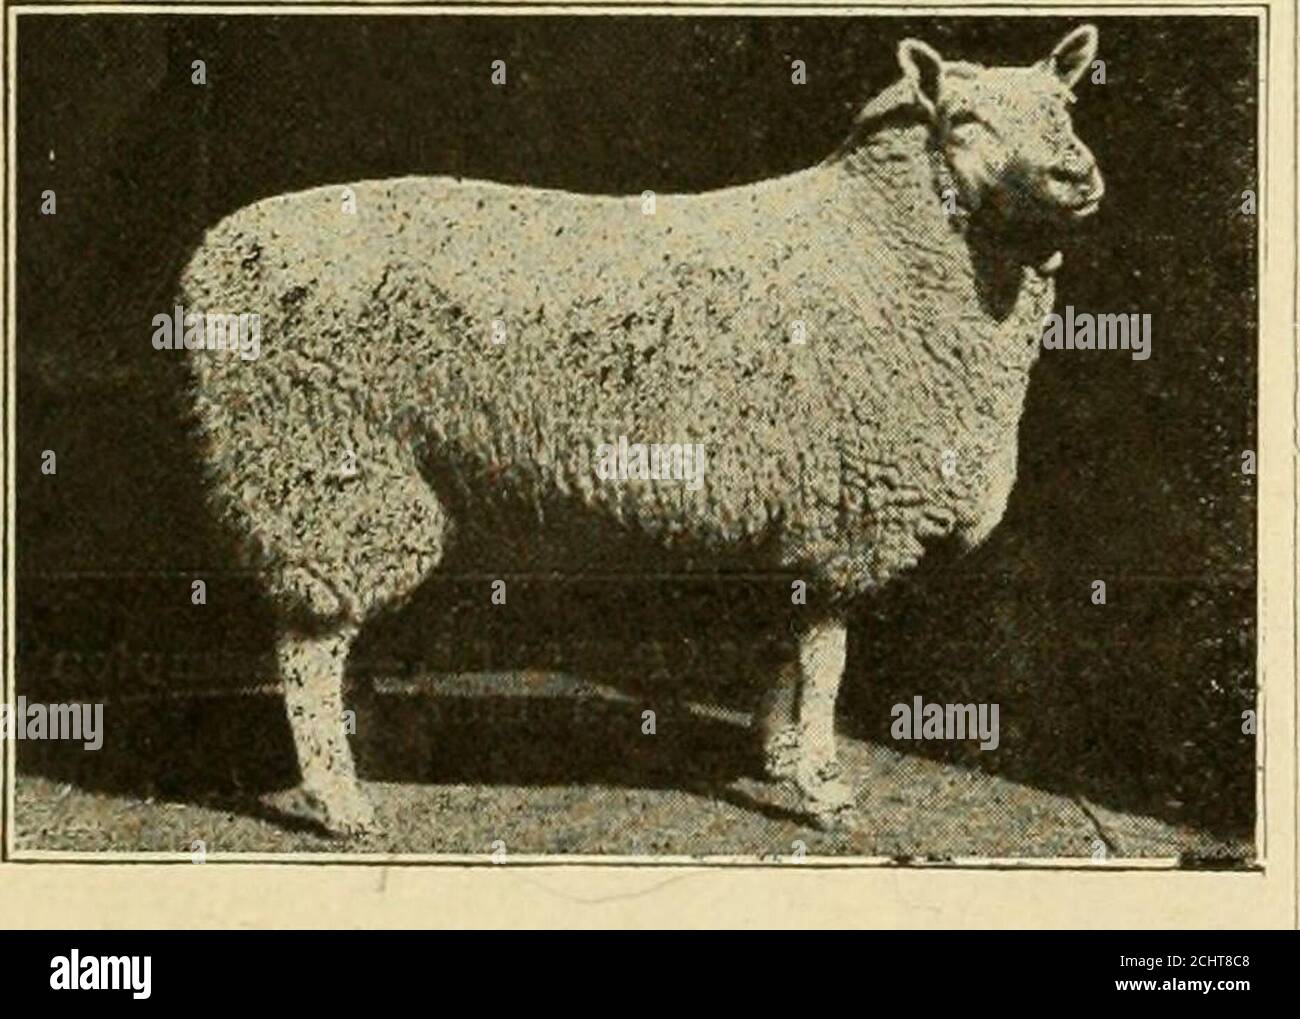 . Hale's history of agriculture by dates. A simple record of historical events and victories of peaceful industries . LEICESTER SHEEP--SANFORD. Weight,420 pounds heaviest ram exliibited. Fleecerecord, 26 poui.ds. Grand champion of thebreed at the Loui.siana Purchase Exposition,1904. Exhibited by Alex W. Smith, of-Maple Lodge, Ontario. Canada. Photographby R. ,T. Rogerson. 1598.—In this year Senor Juao Ornatestarted out from Zacatecas, in Mexico, toexplore the country now known as NewMexico. He had 400 colonists, 83 wagonsand 7,000 cattle. He founded Santa Fe. leOO.^Roberl Bakewell, of England, Stock Photo